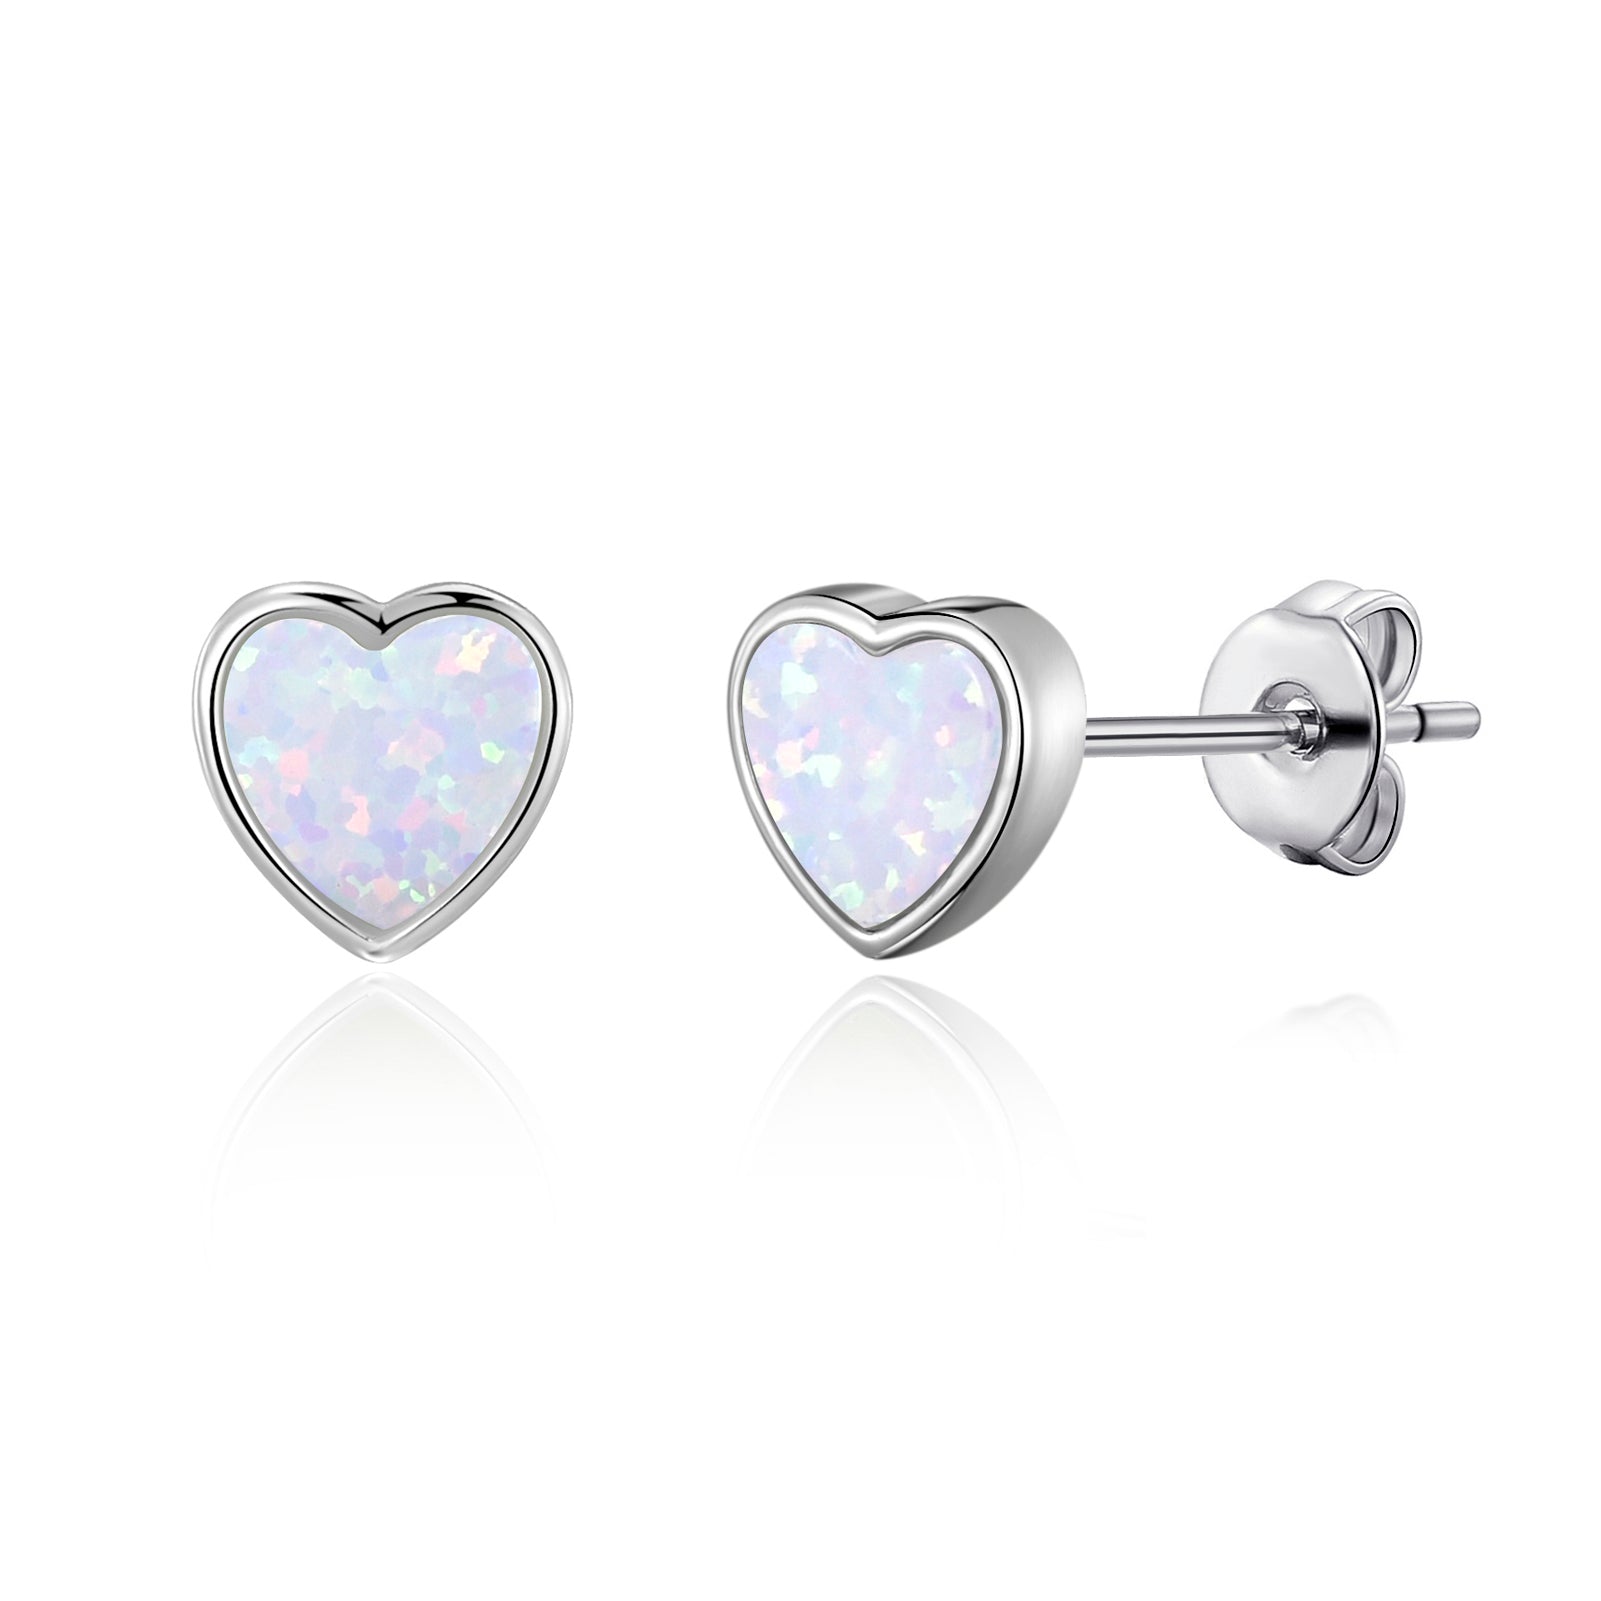 Synthetic White Opal Heart Stud Earrings with Quote Card